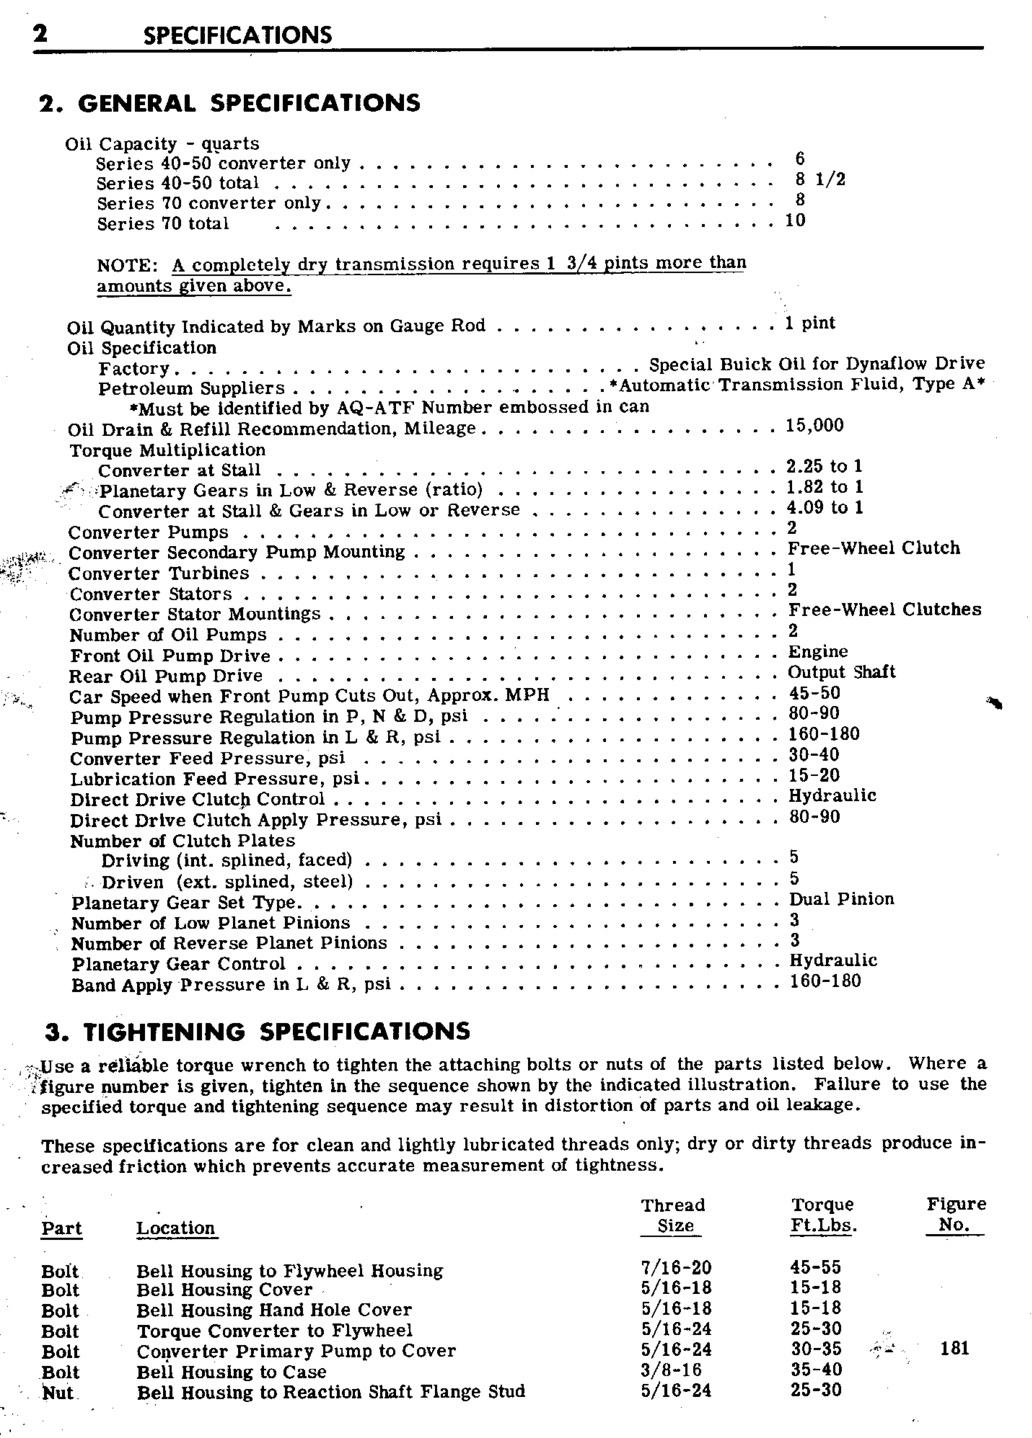 n_01 1948 Buick Transmission - Specifications-003-003.jpg